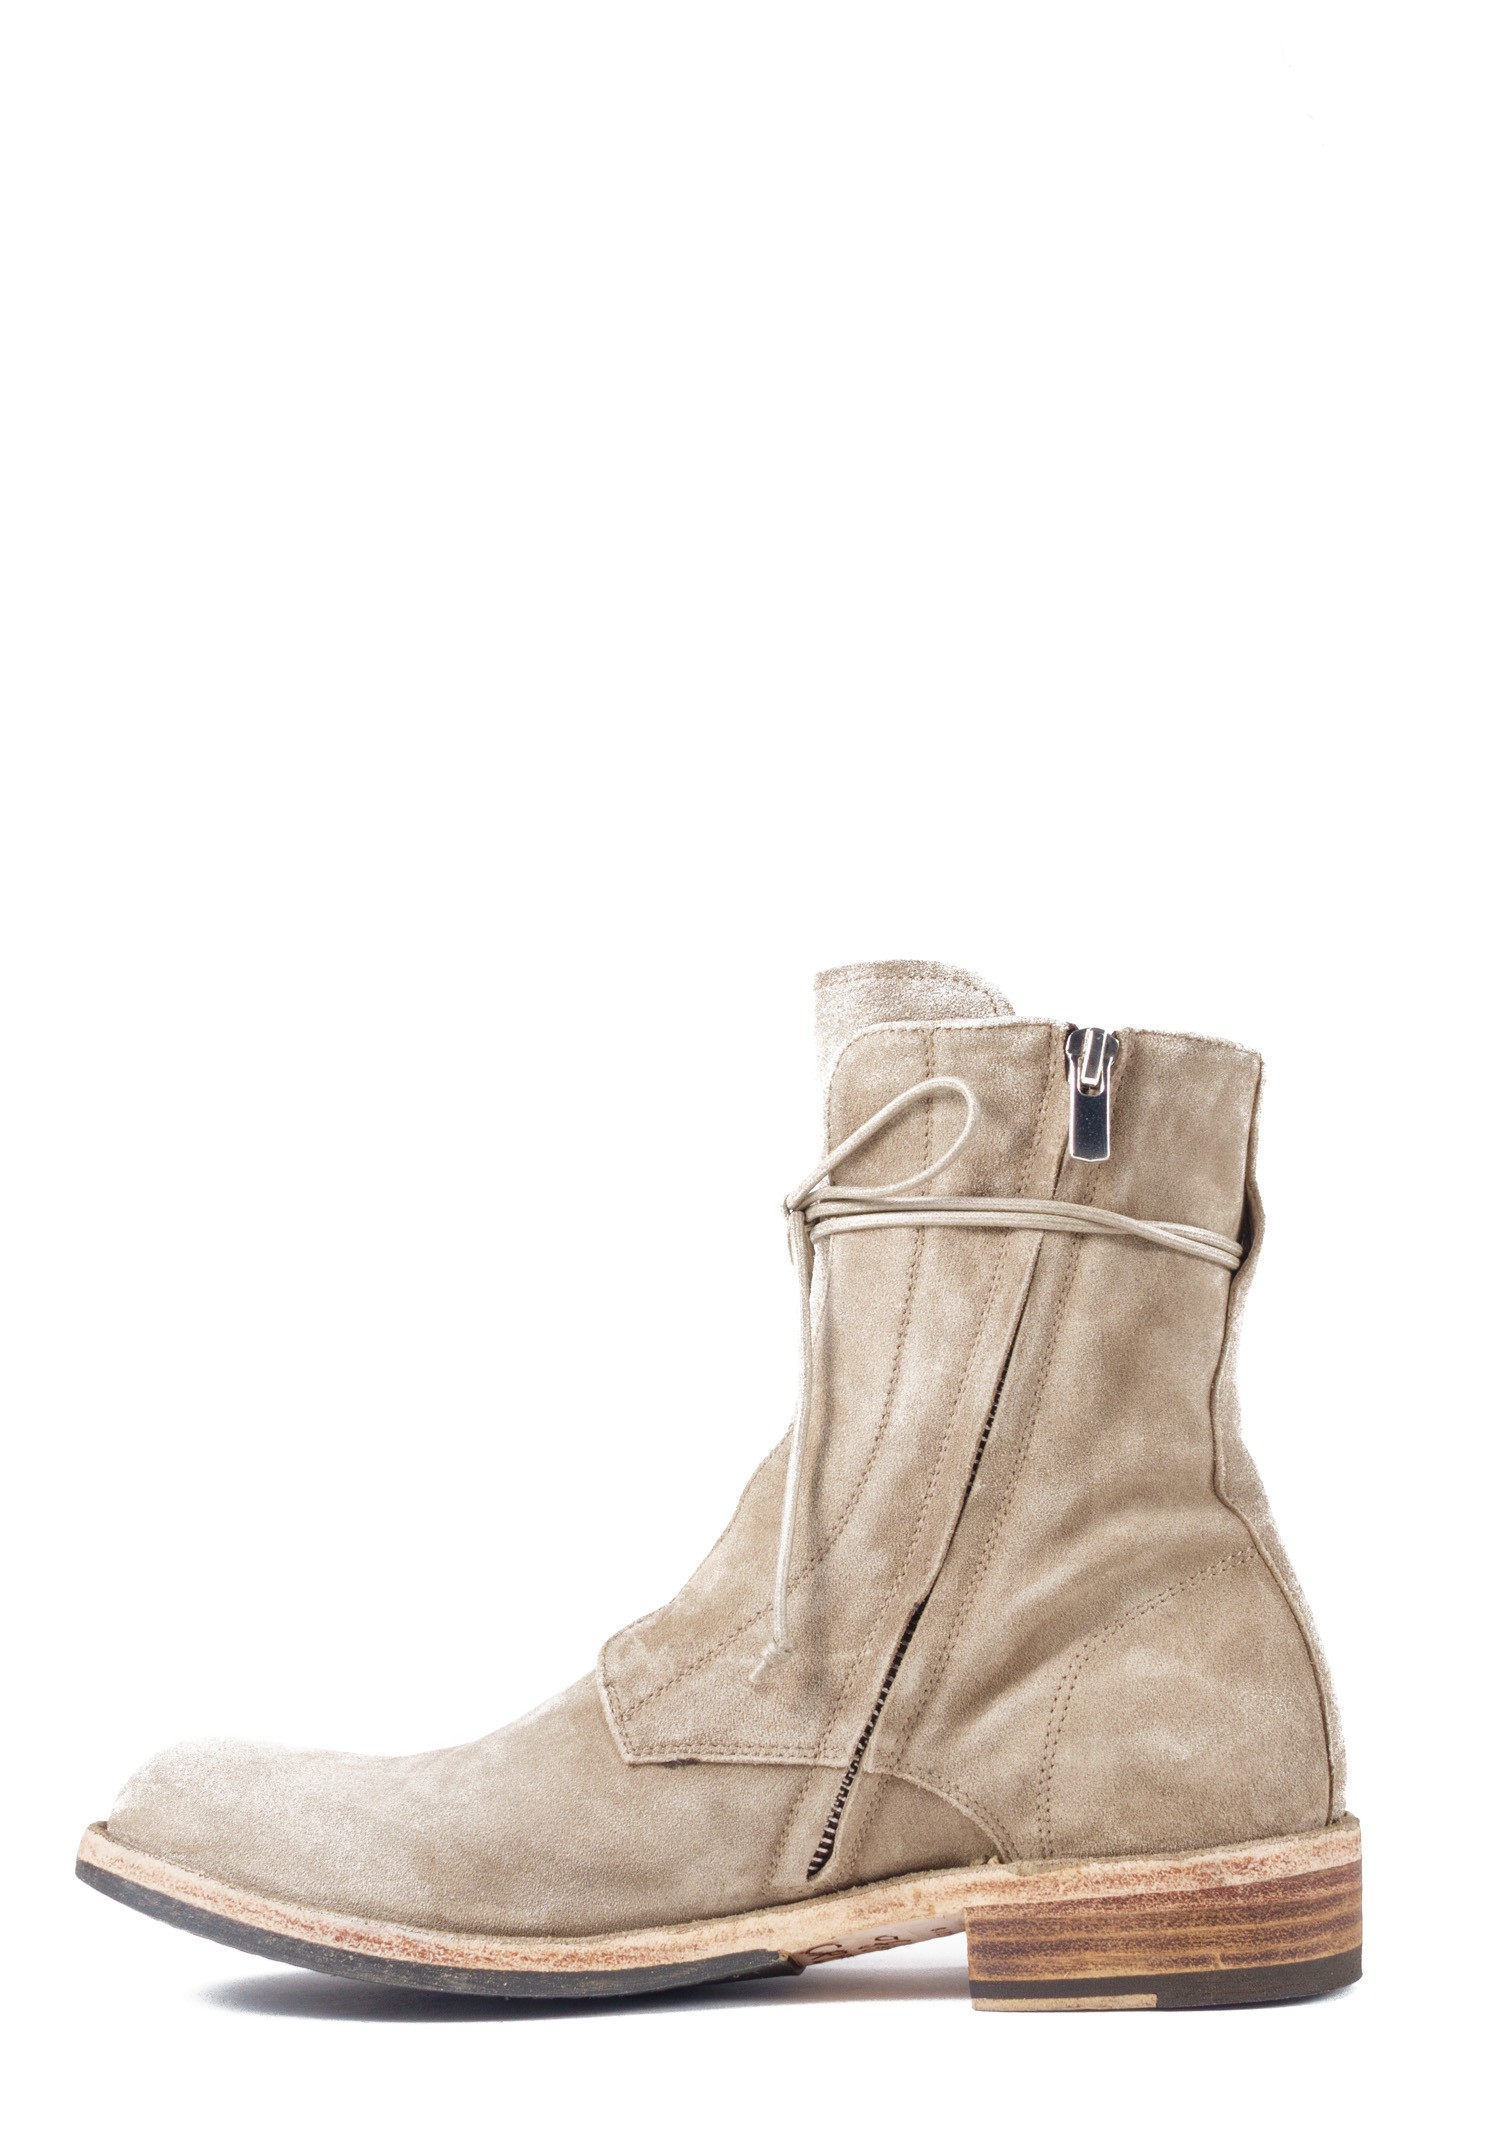 Officine Creative Legrand Suede Boot in Softy Flint | Santa Fe Dry ...